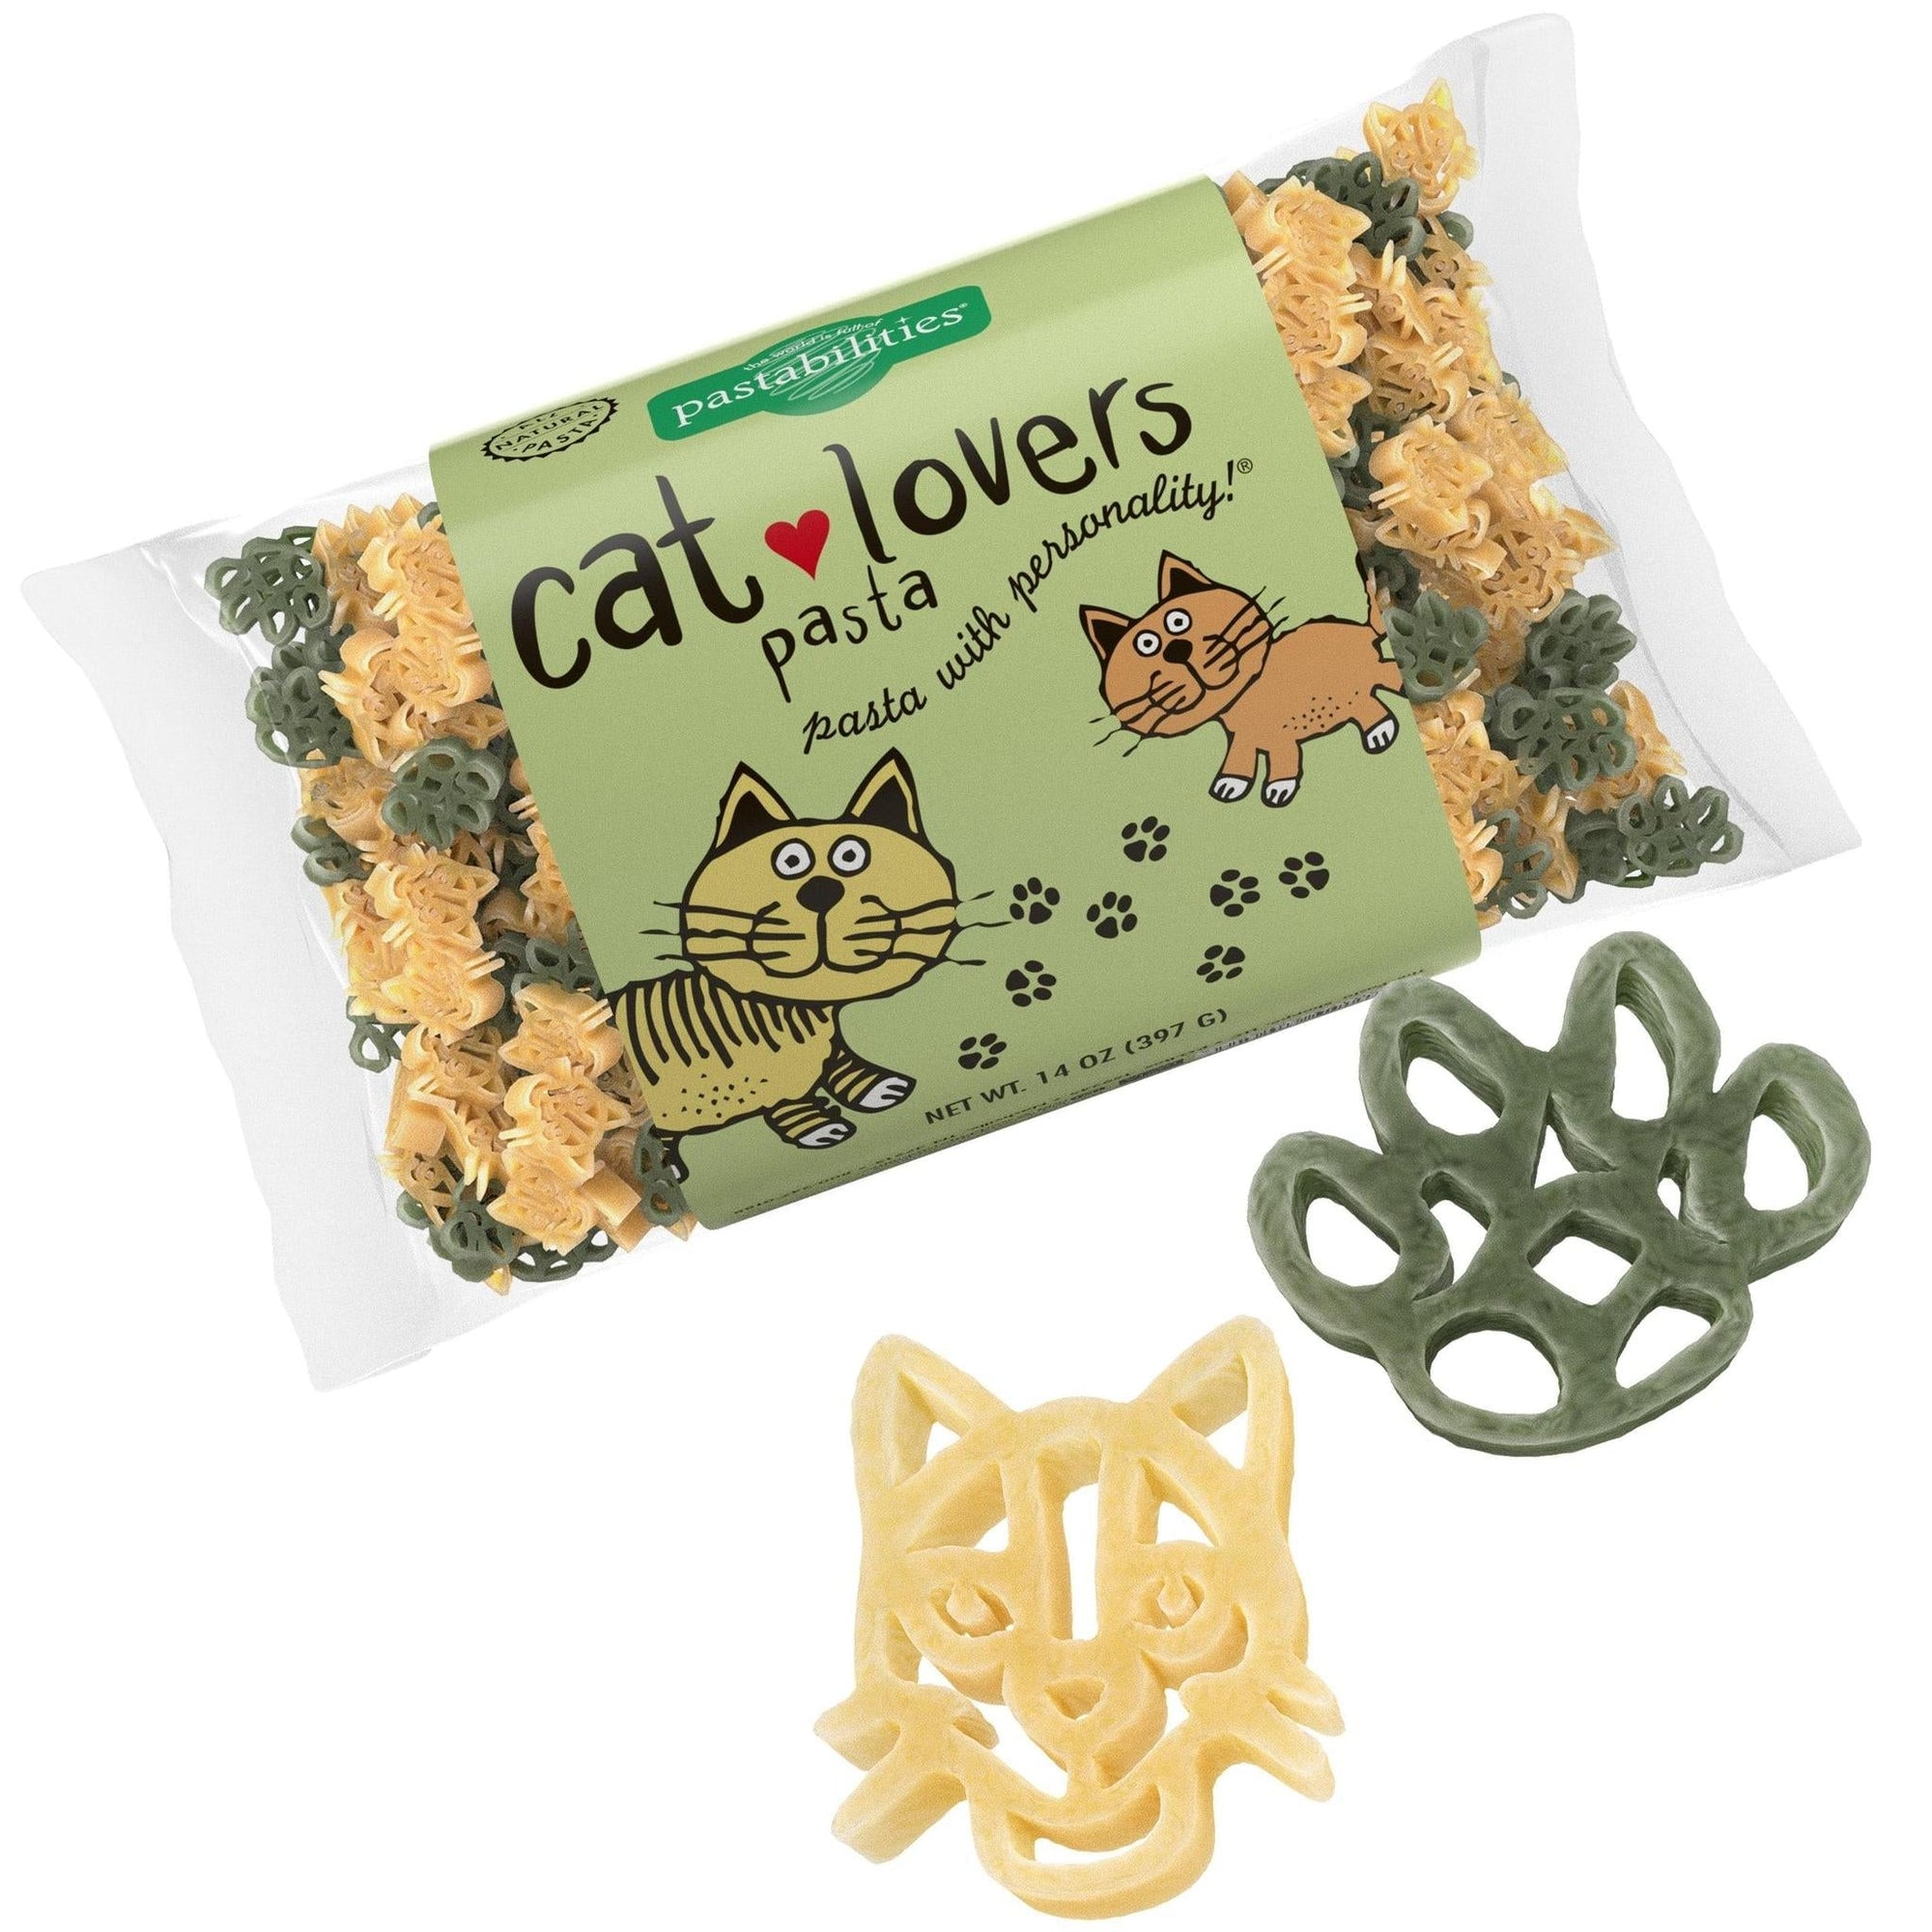 Cat Lovers Shaped Pasta